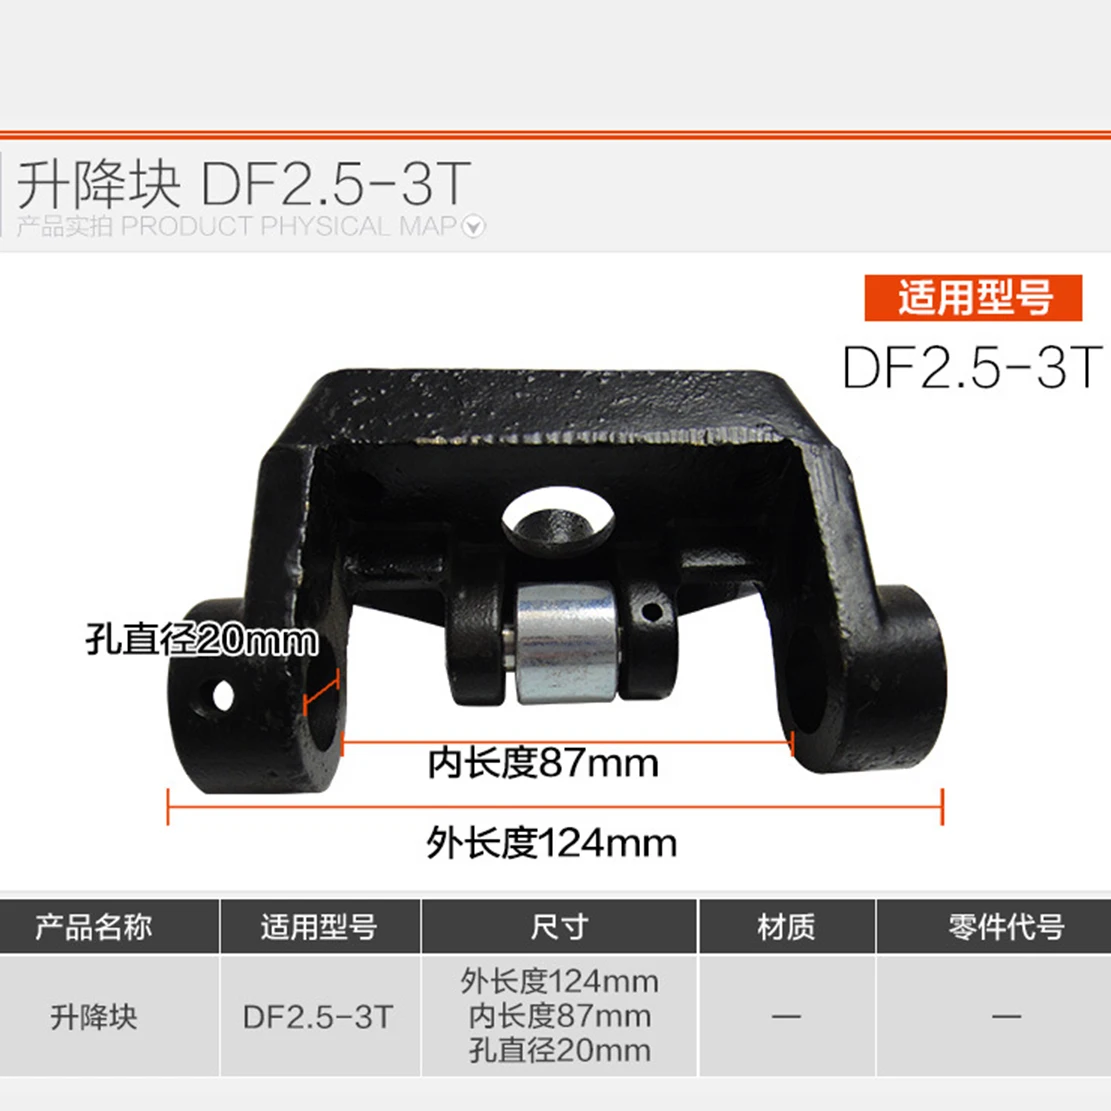 Forklift Manual Hydraulic Oil Pump Valve Body Df Split  Hand Truck Fix Parts Pressure Relief Sping Copper Forklift Control